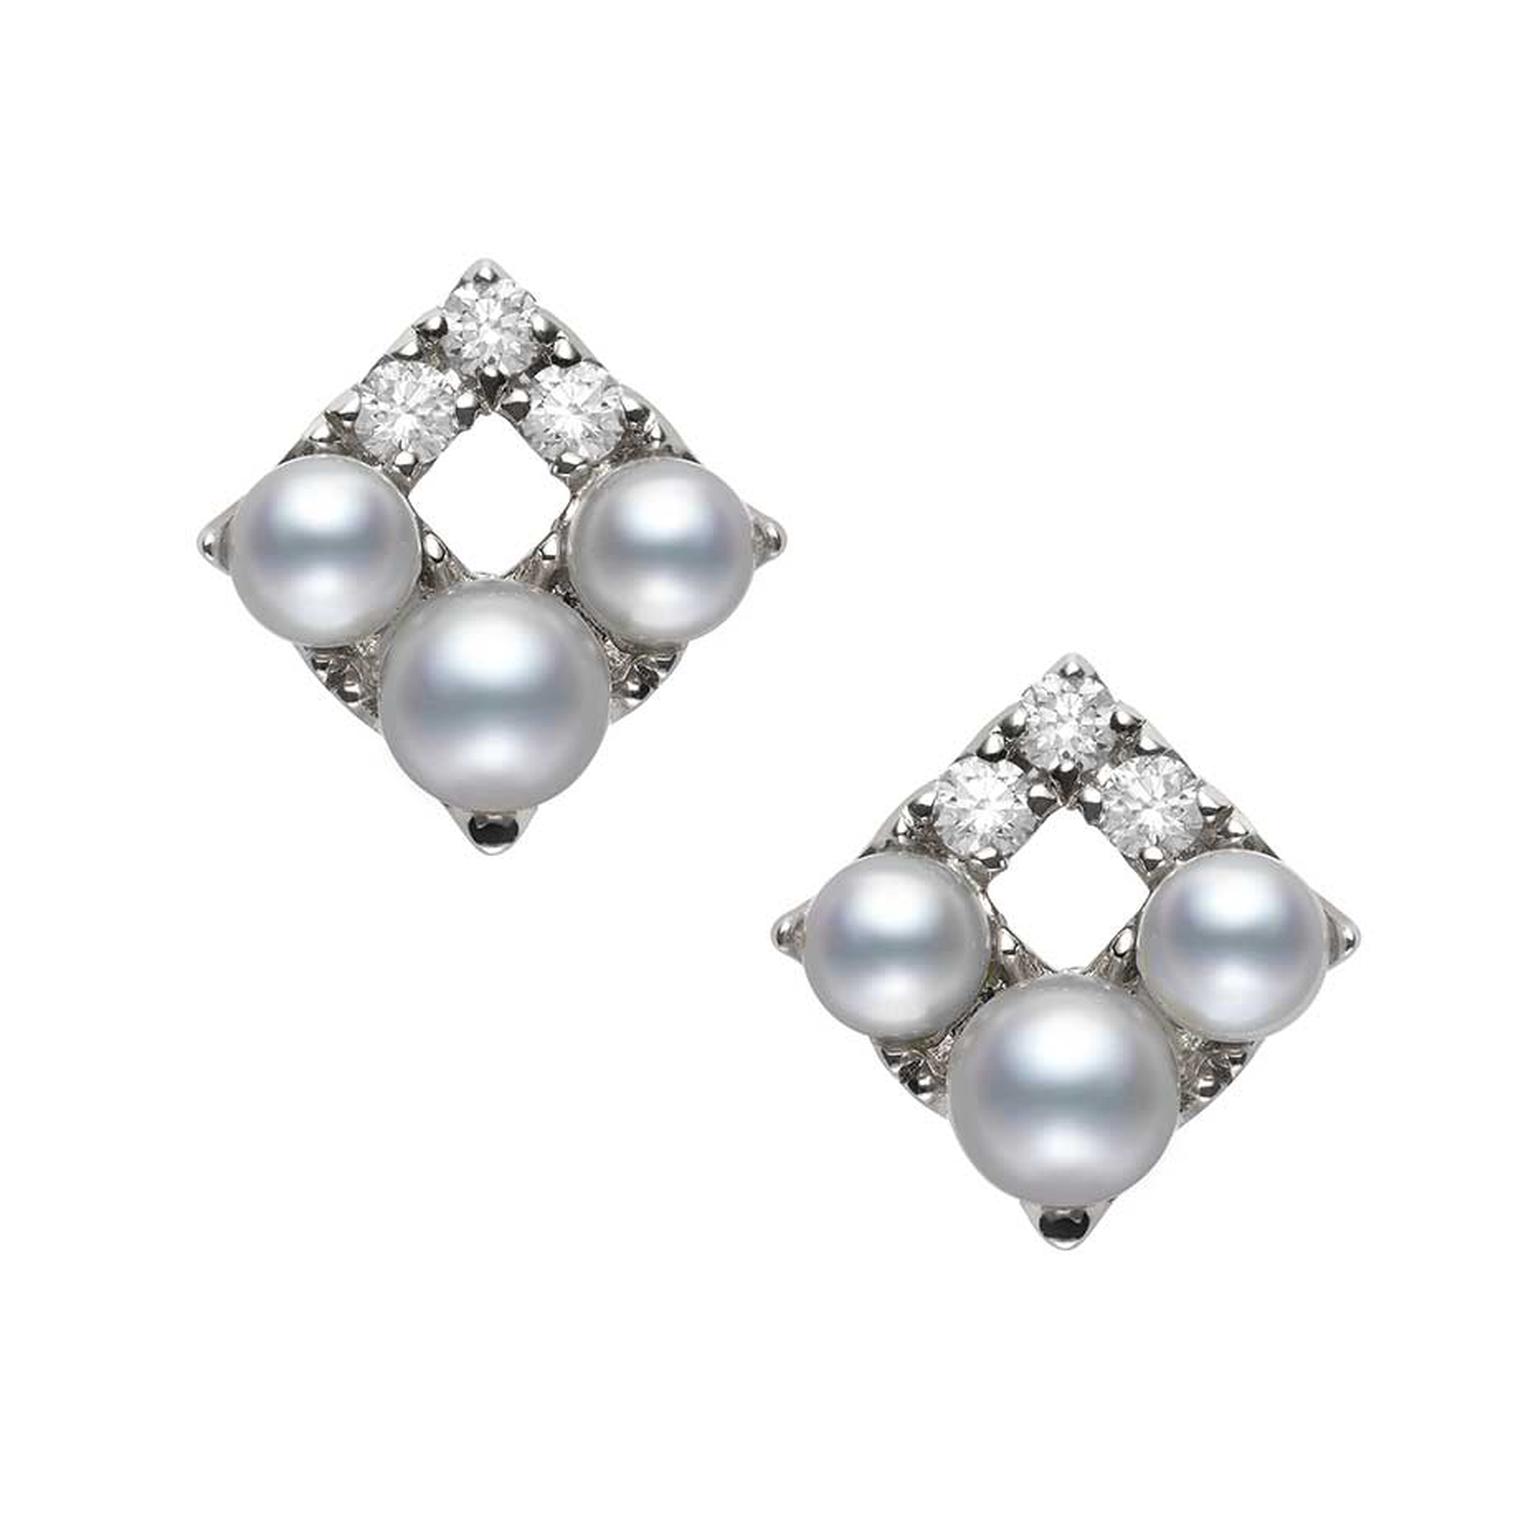 Mikimoto Falling Flakes pearl earrings with Akoya pearls and diamonds in white gold (£1,150).